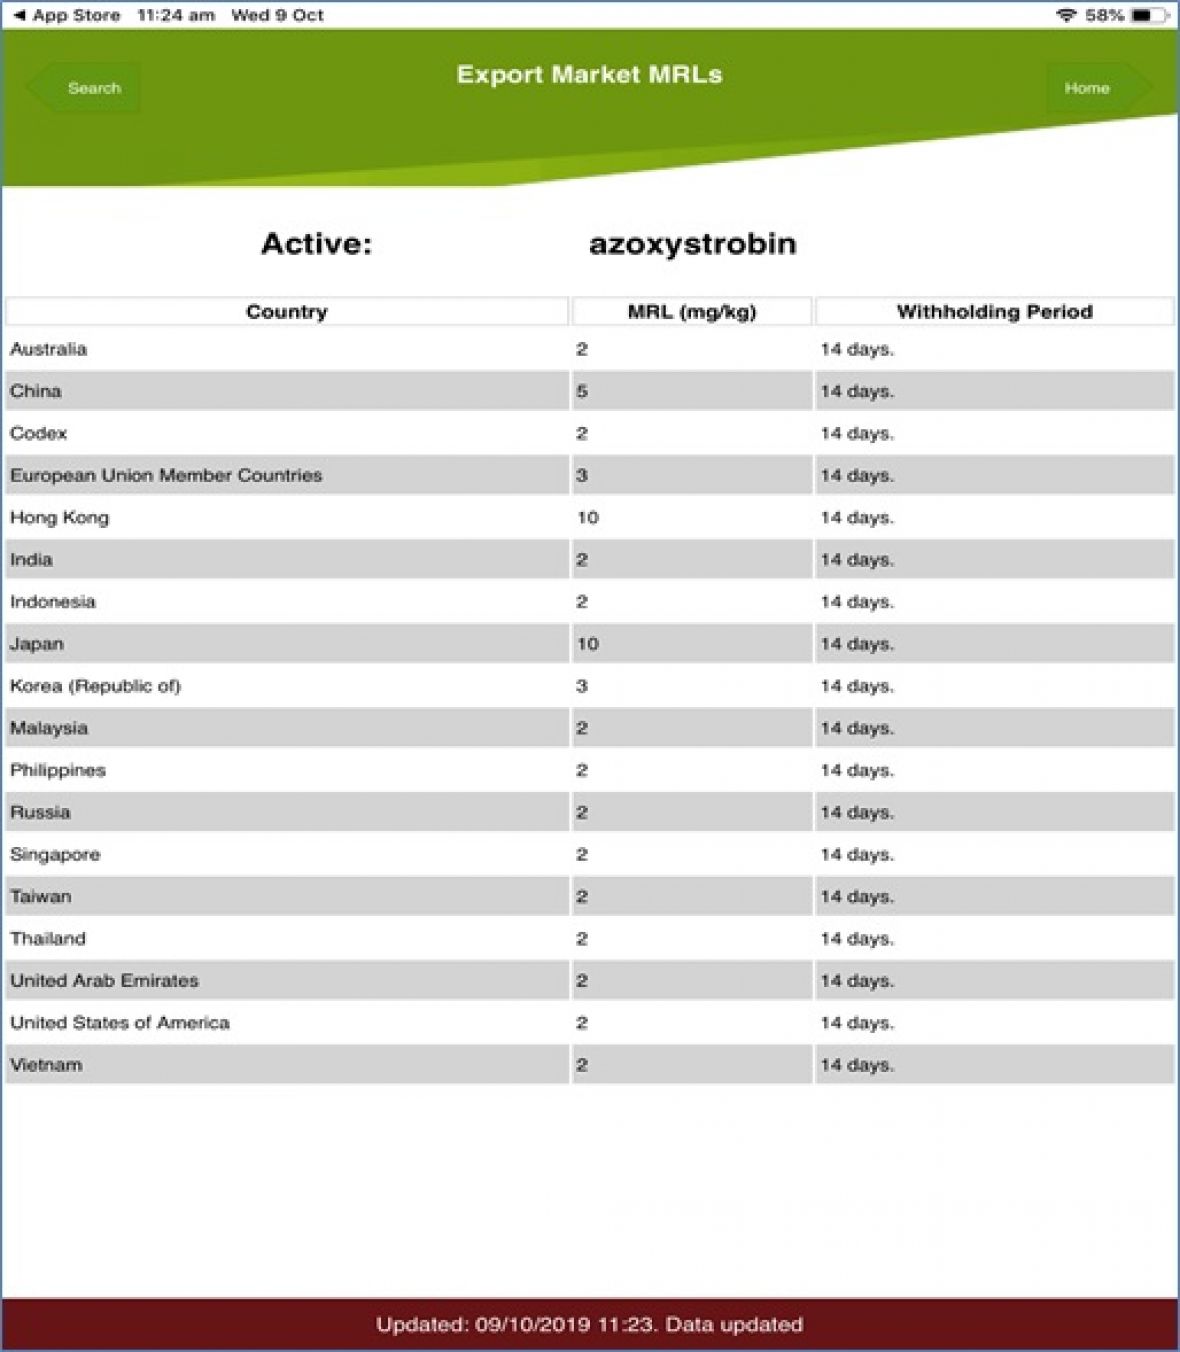 Australian table grapes association grower app page listing country, MRL and withholding periods